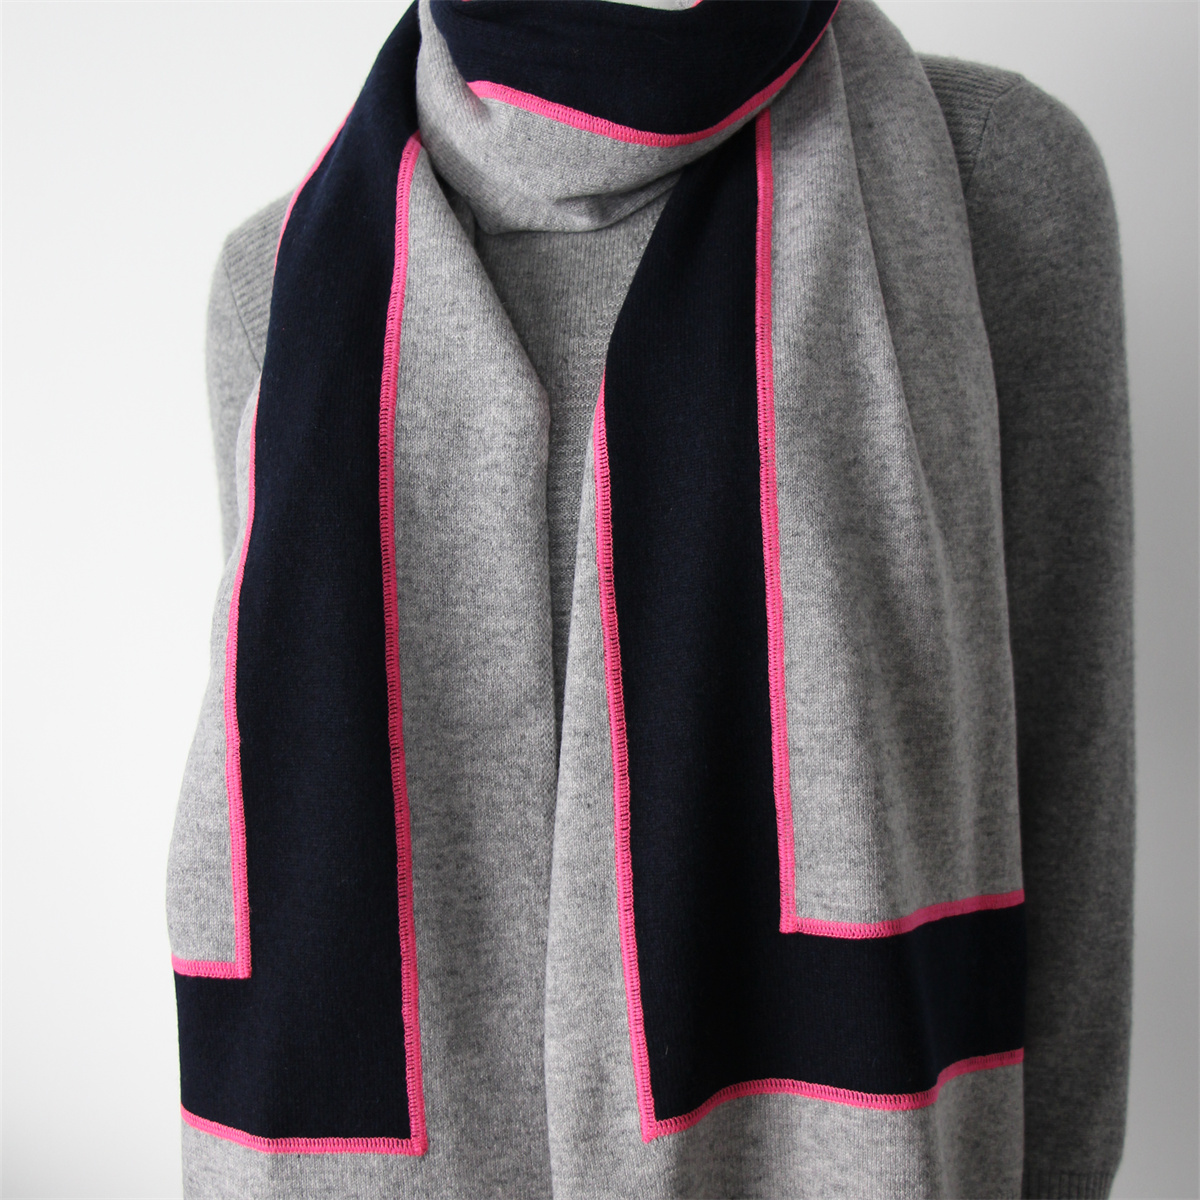 Wholesale Cashmere Scarf Manufacturer and Supplier, Product | Sharrefun